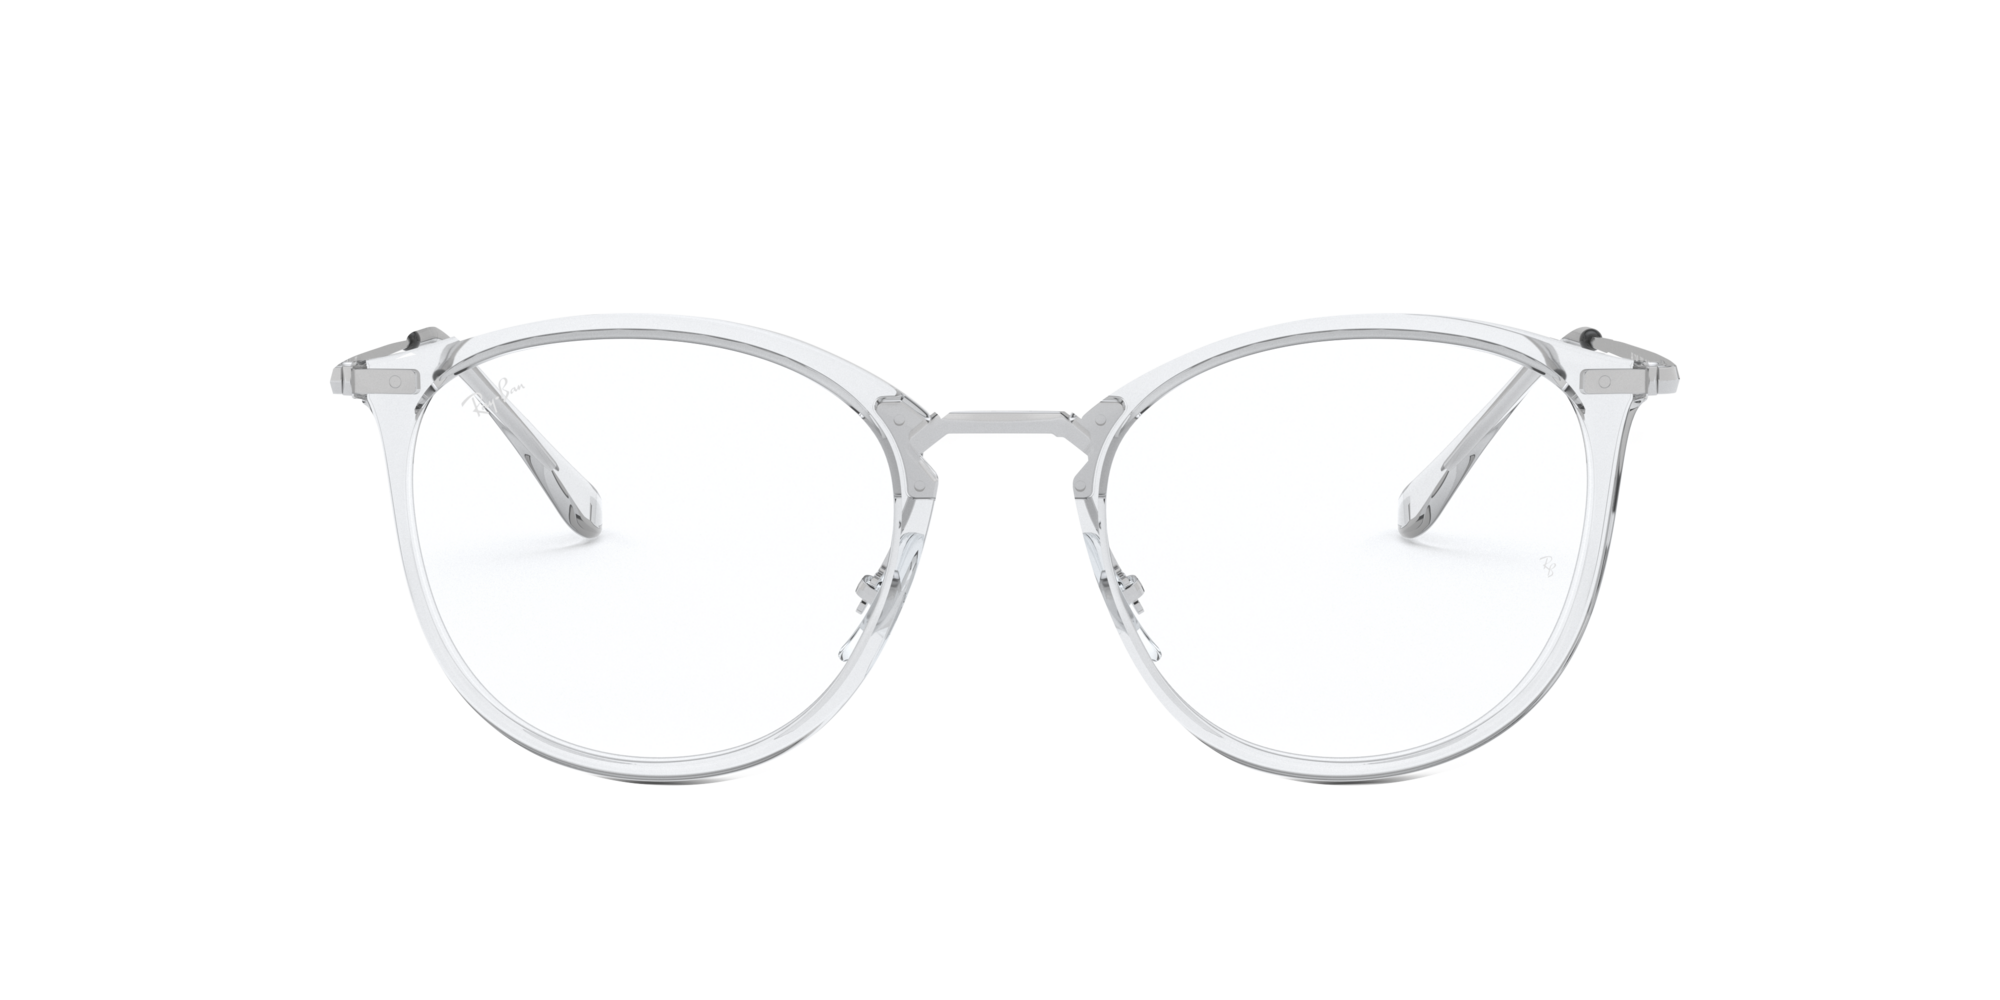 Ray Ban 0rx7140 Glasses In Clear White Target Optical